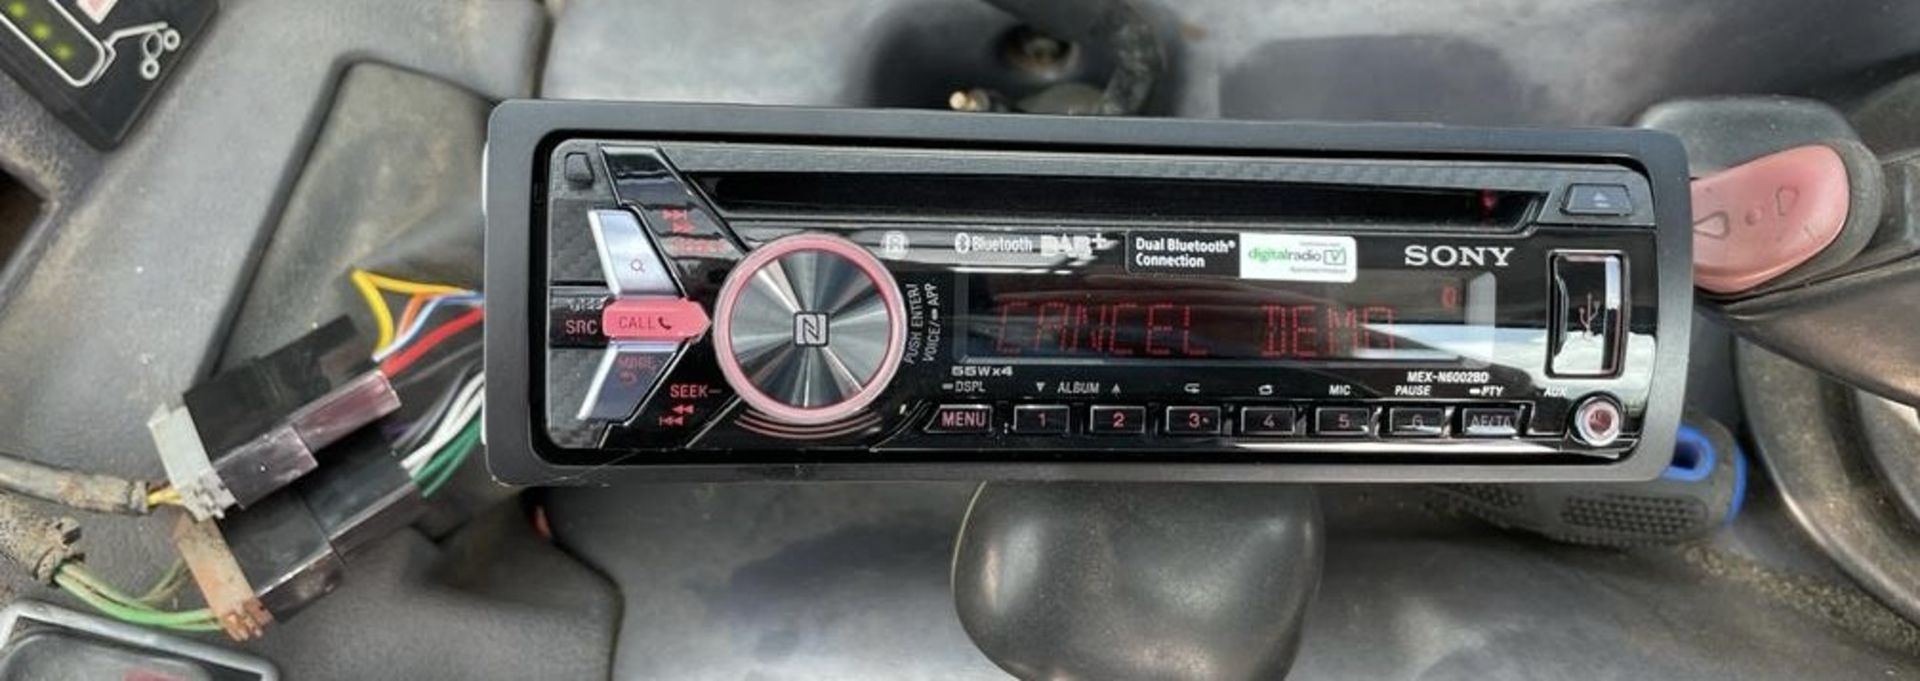 Sony Vehicle CD Player - Image 5 of 5